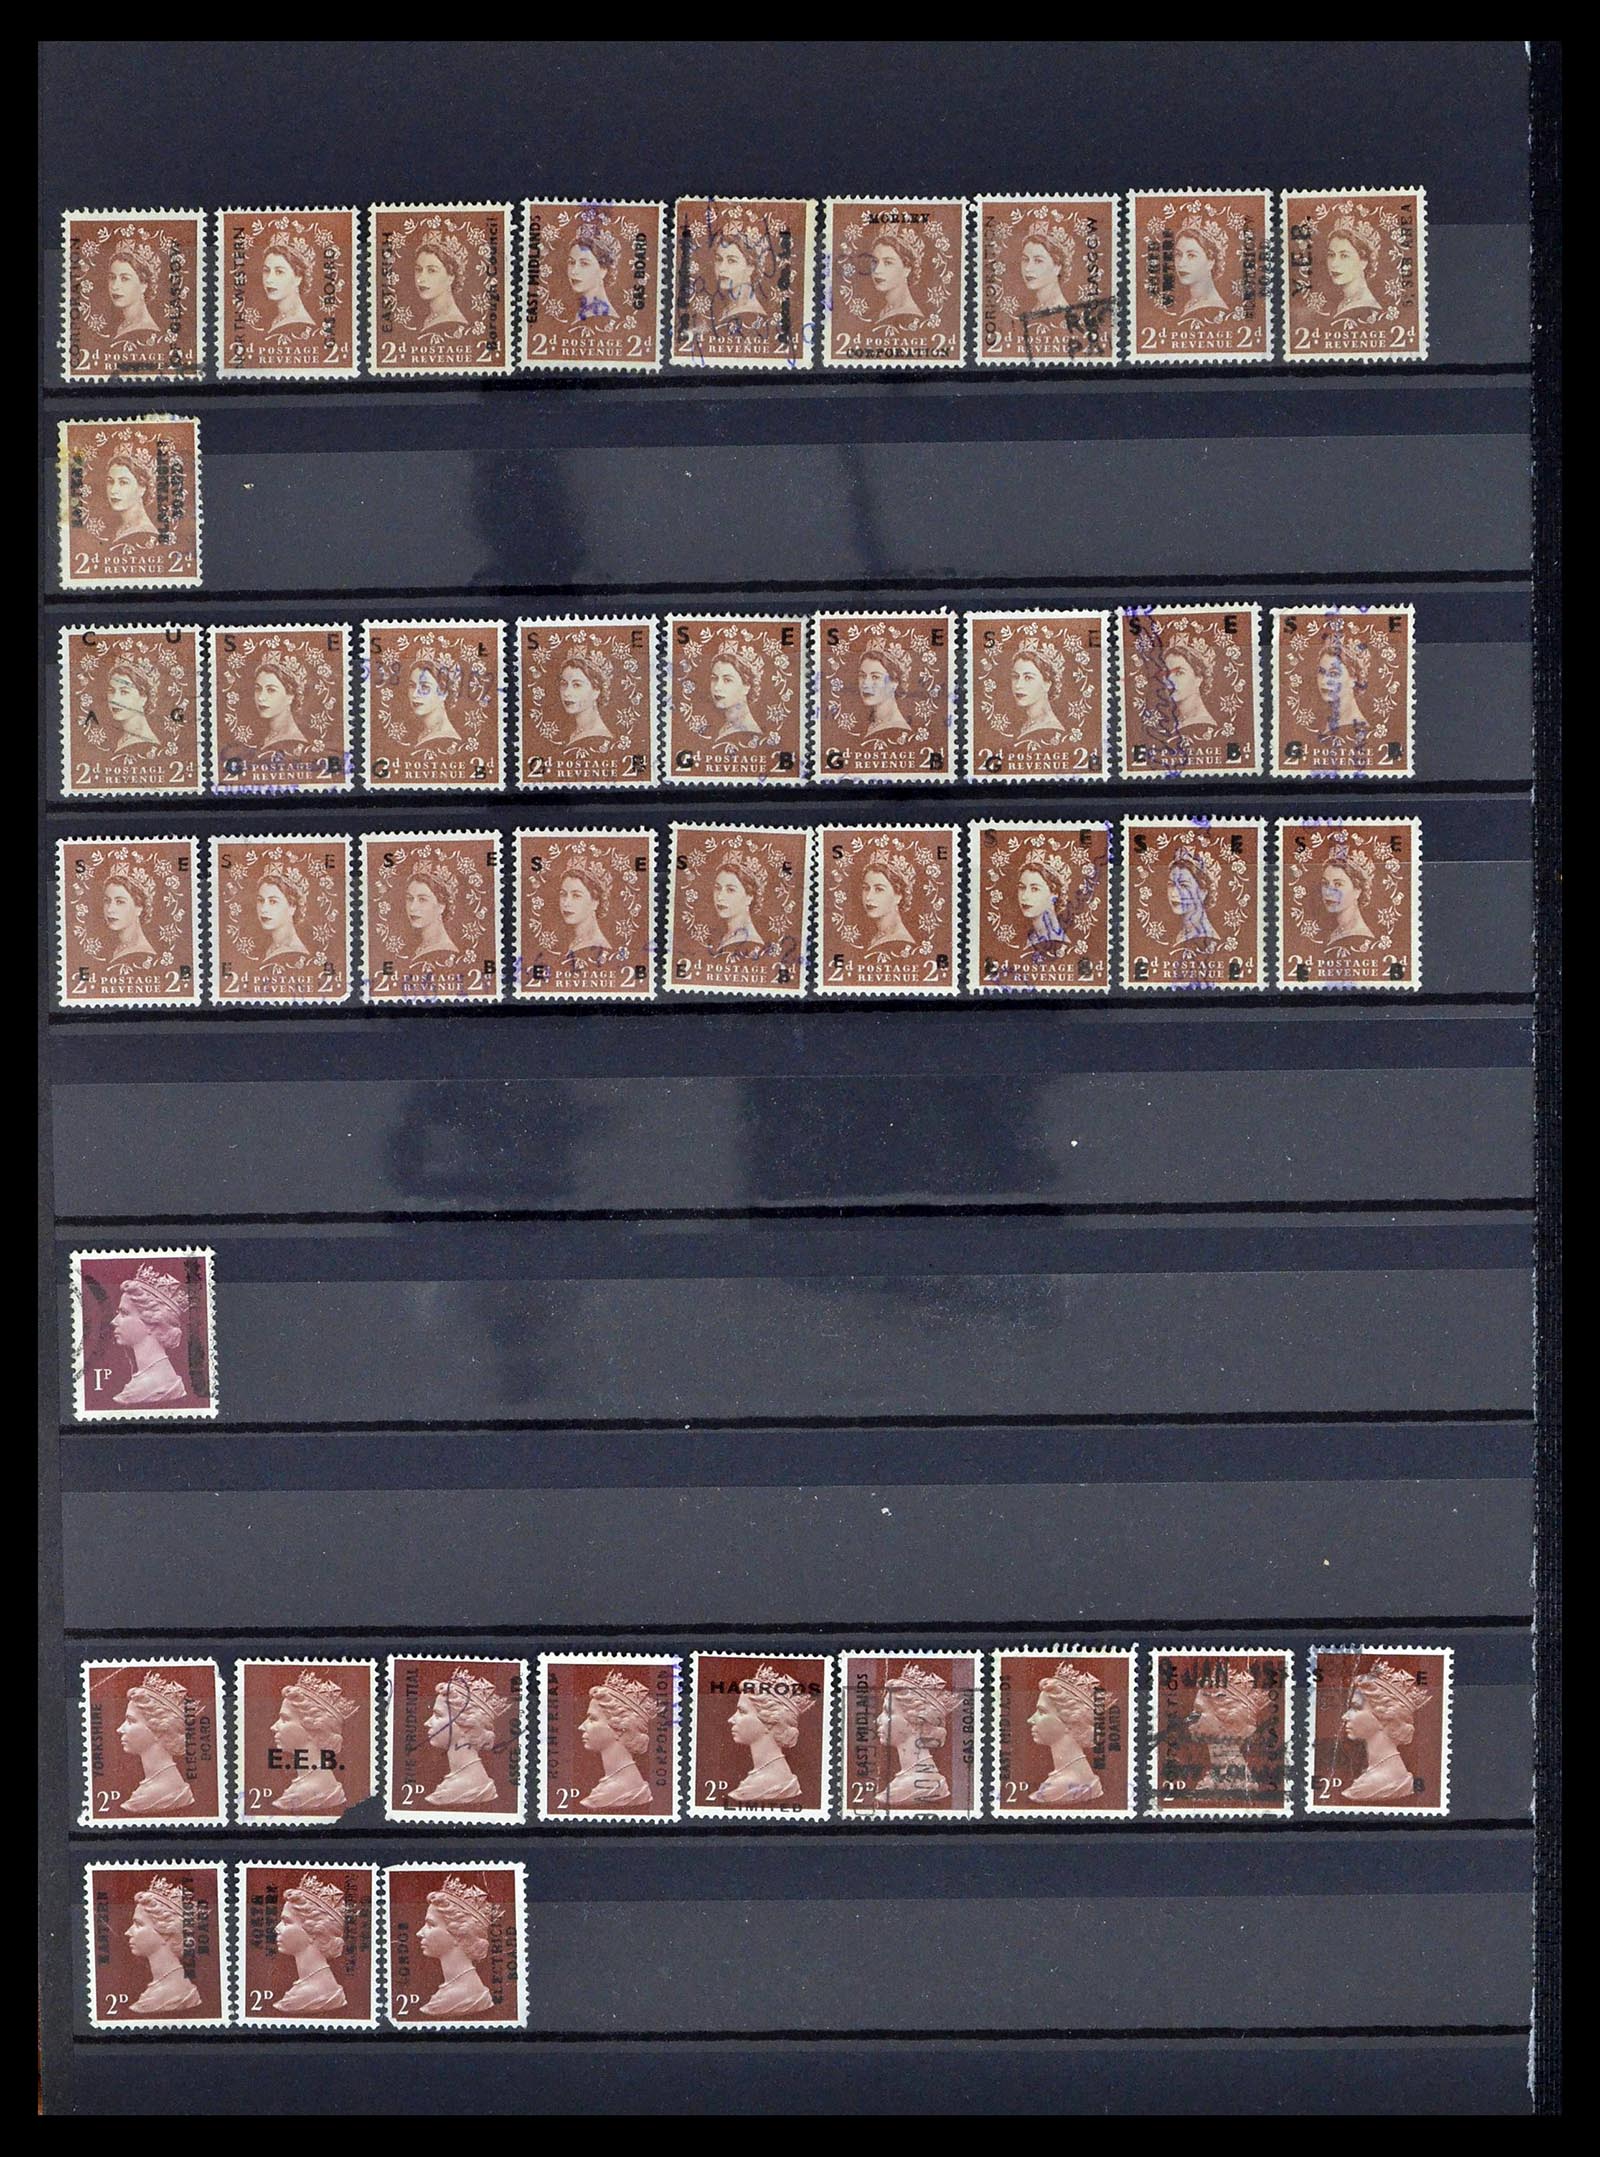 39196 0135 - Stamp collection 39196 Great Britain 1844-1955.